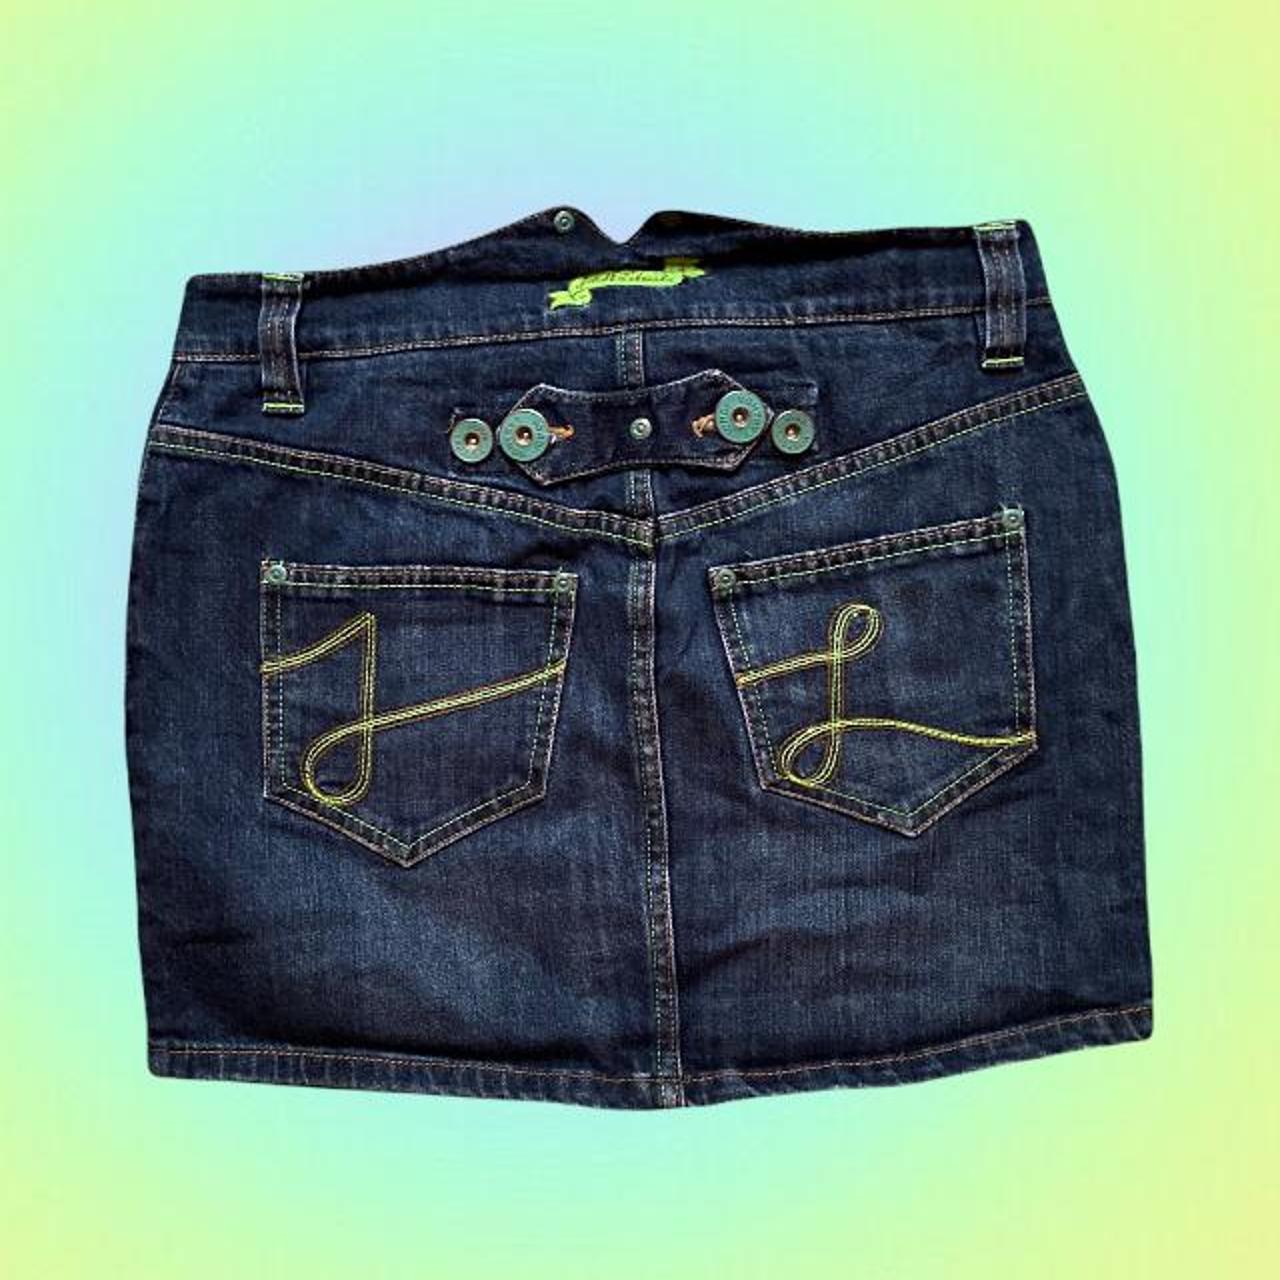 Vintage late 90s early 2000s denim mini skirt with... - Depop